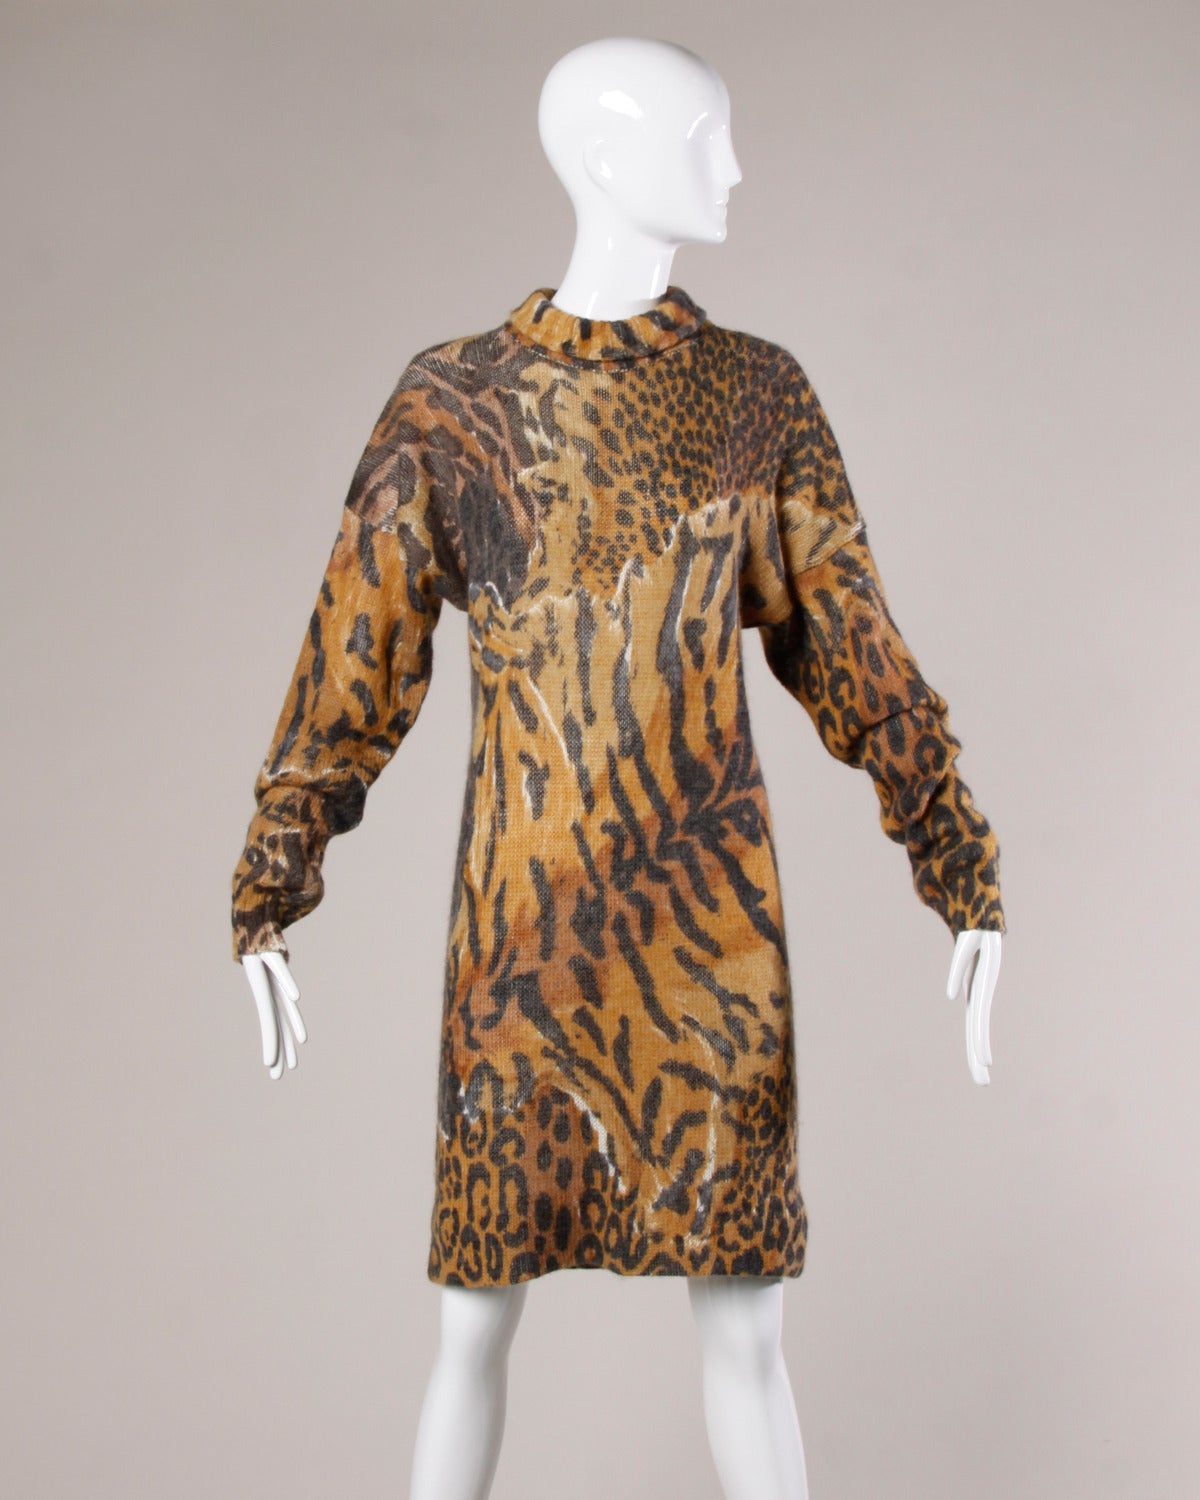 Krizia Iconic Vintage Animal Print Oversized Knit Sweater Dress In Excellent Condition For Sale In Sparks, NV